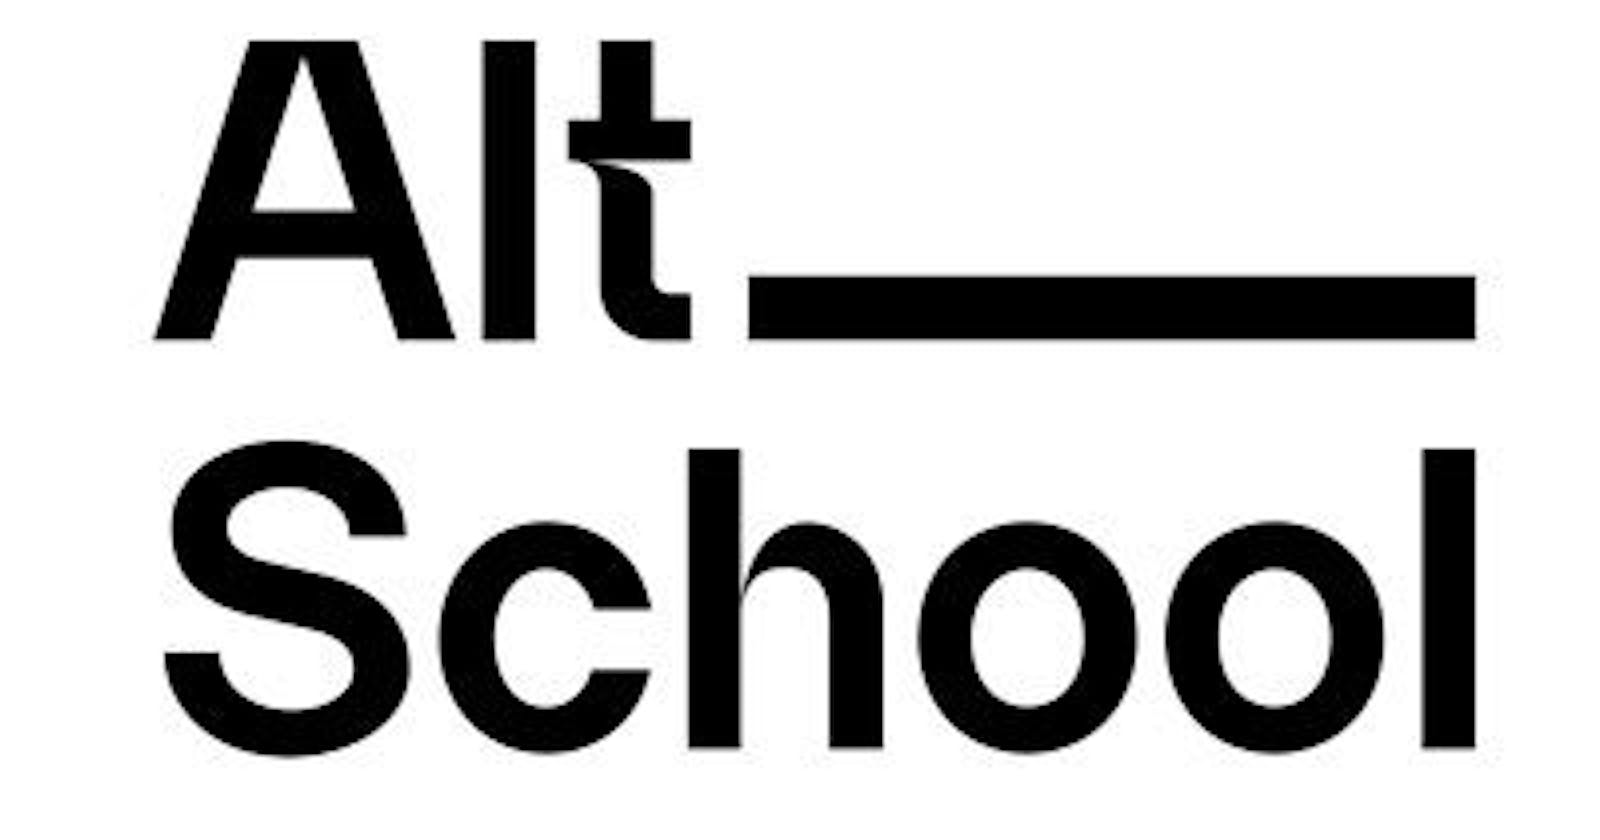 My First Semester at AltSchool Africa: The Ups and Downs of Remote Learning.